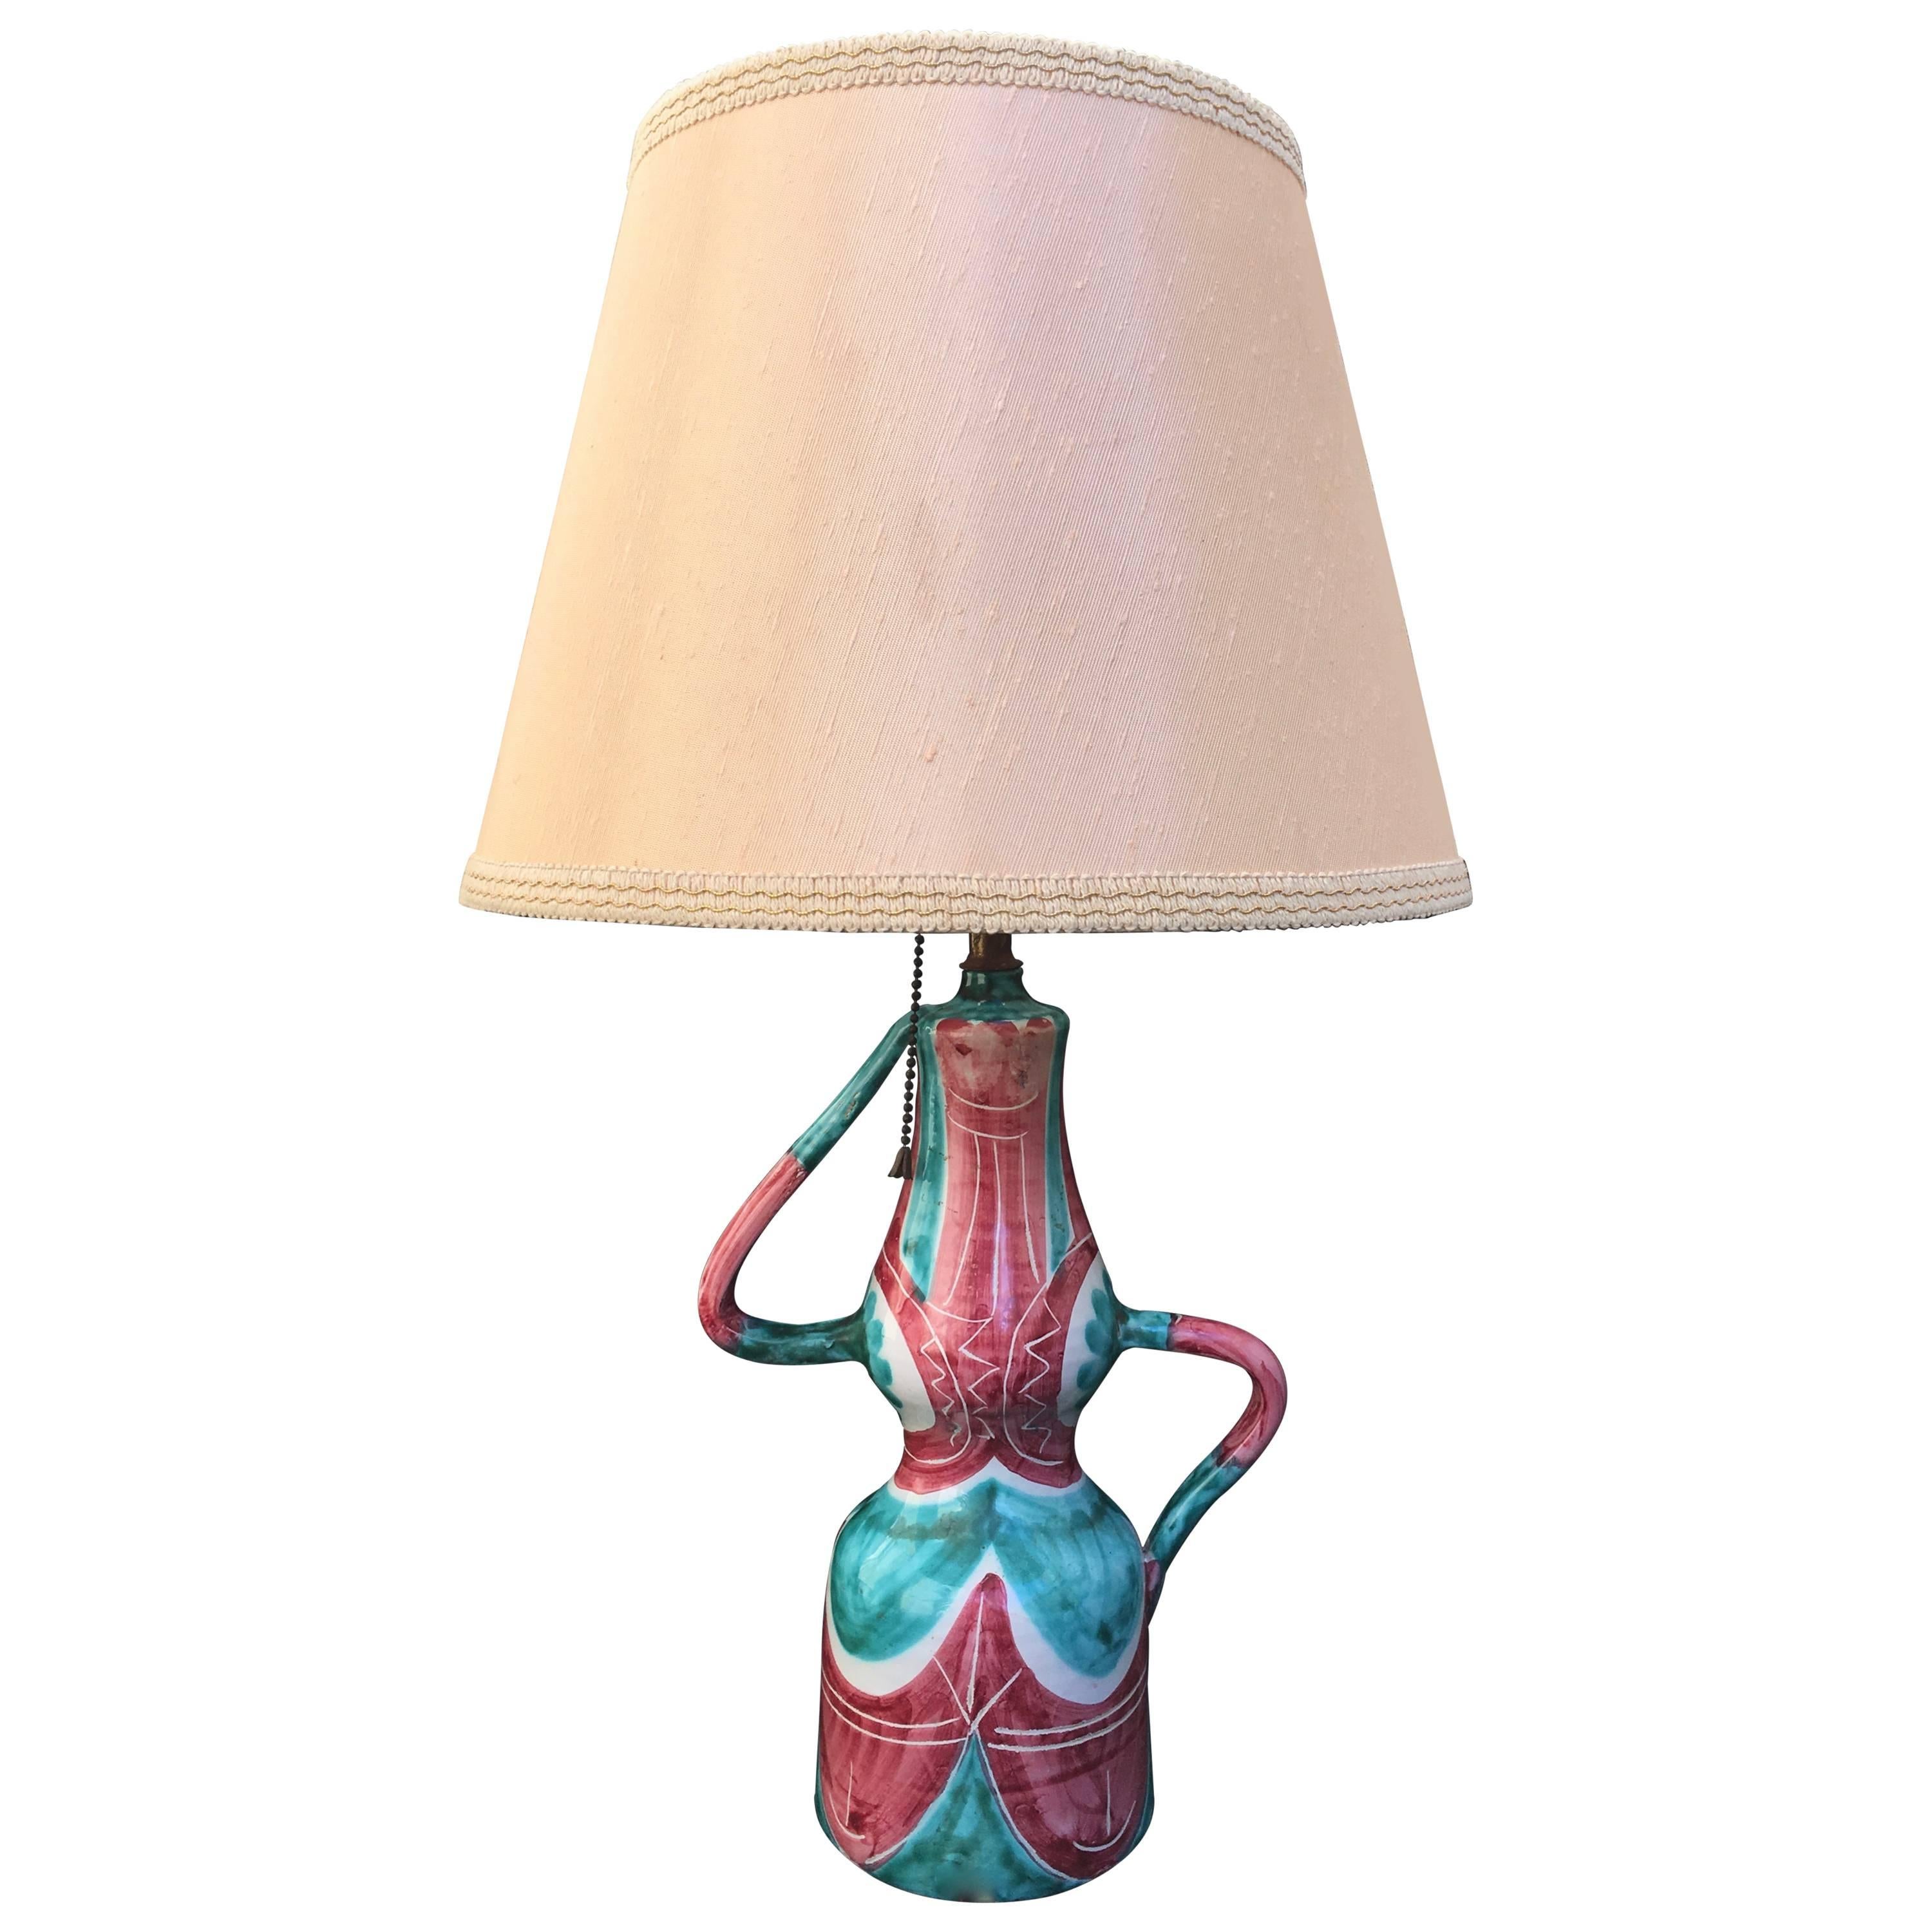 Italian Ceramic Lamp, Comical Portrait of a Lady, 1950s For Sale